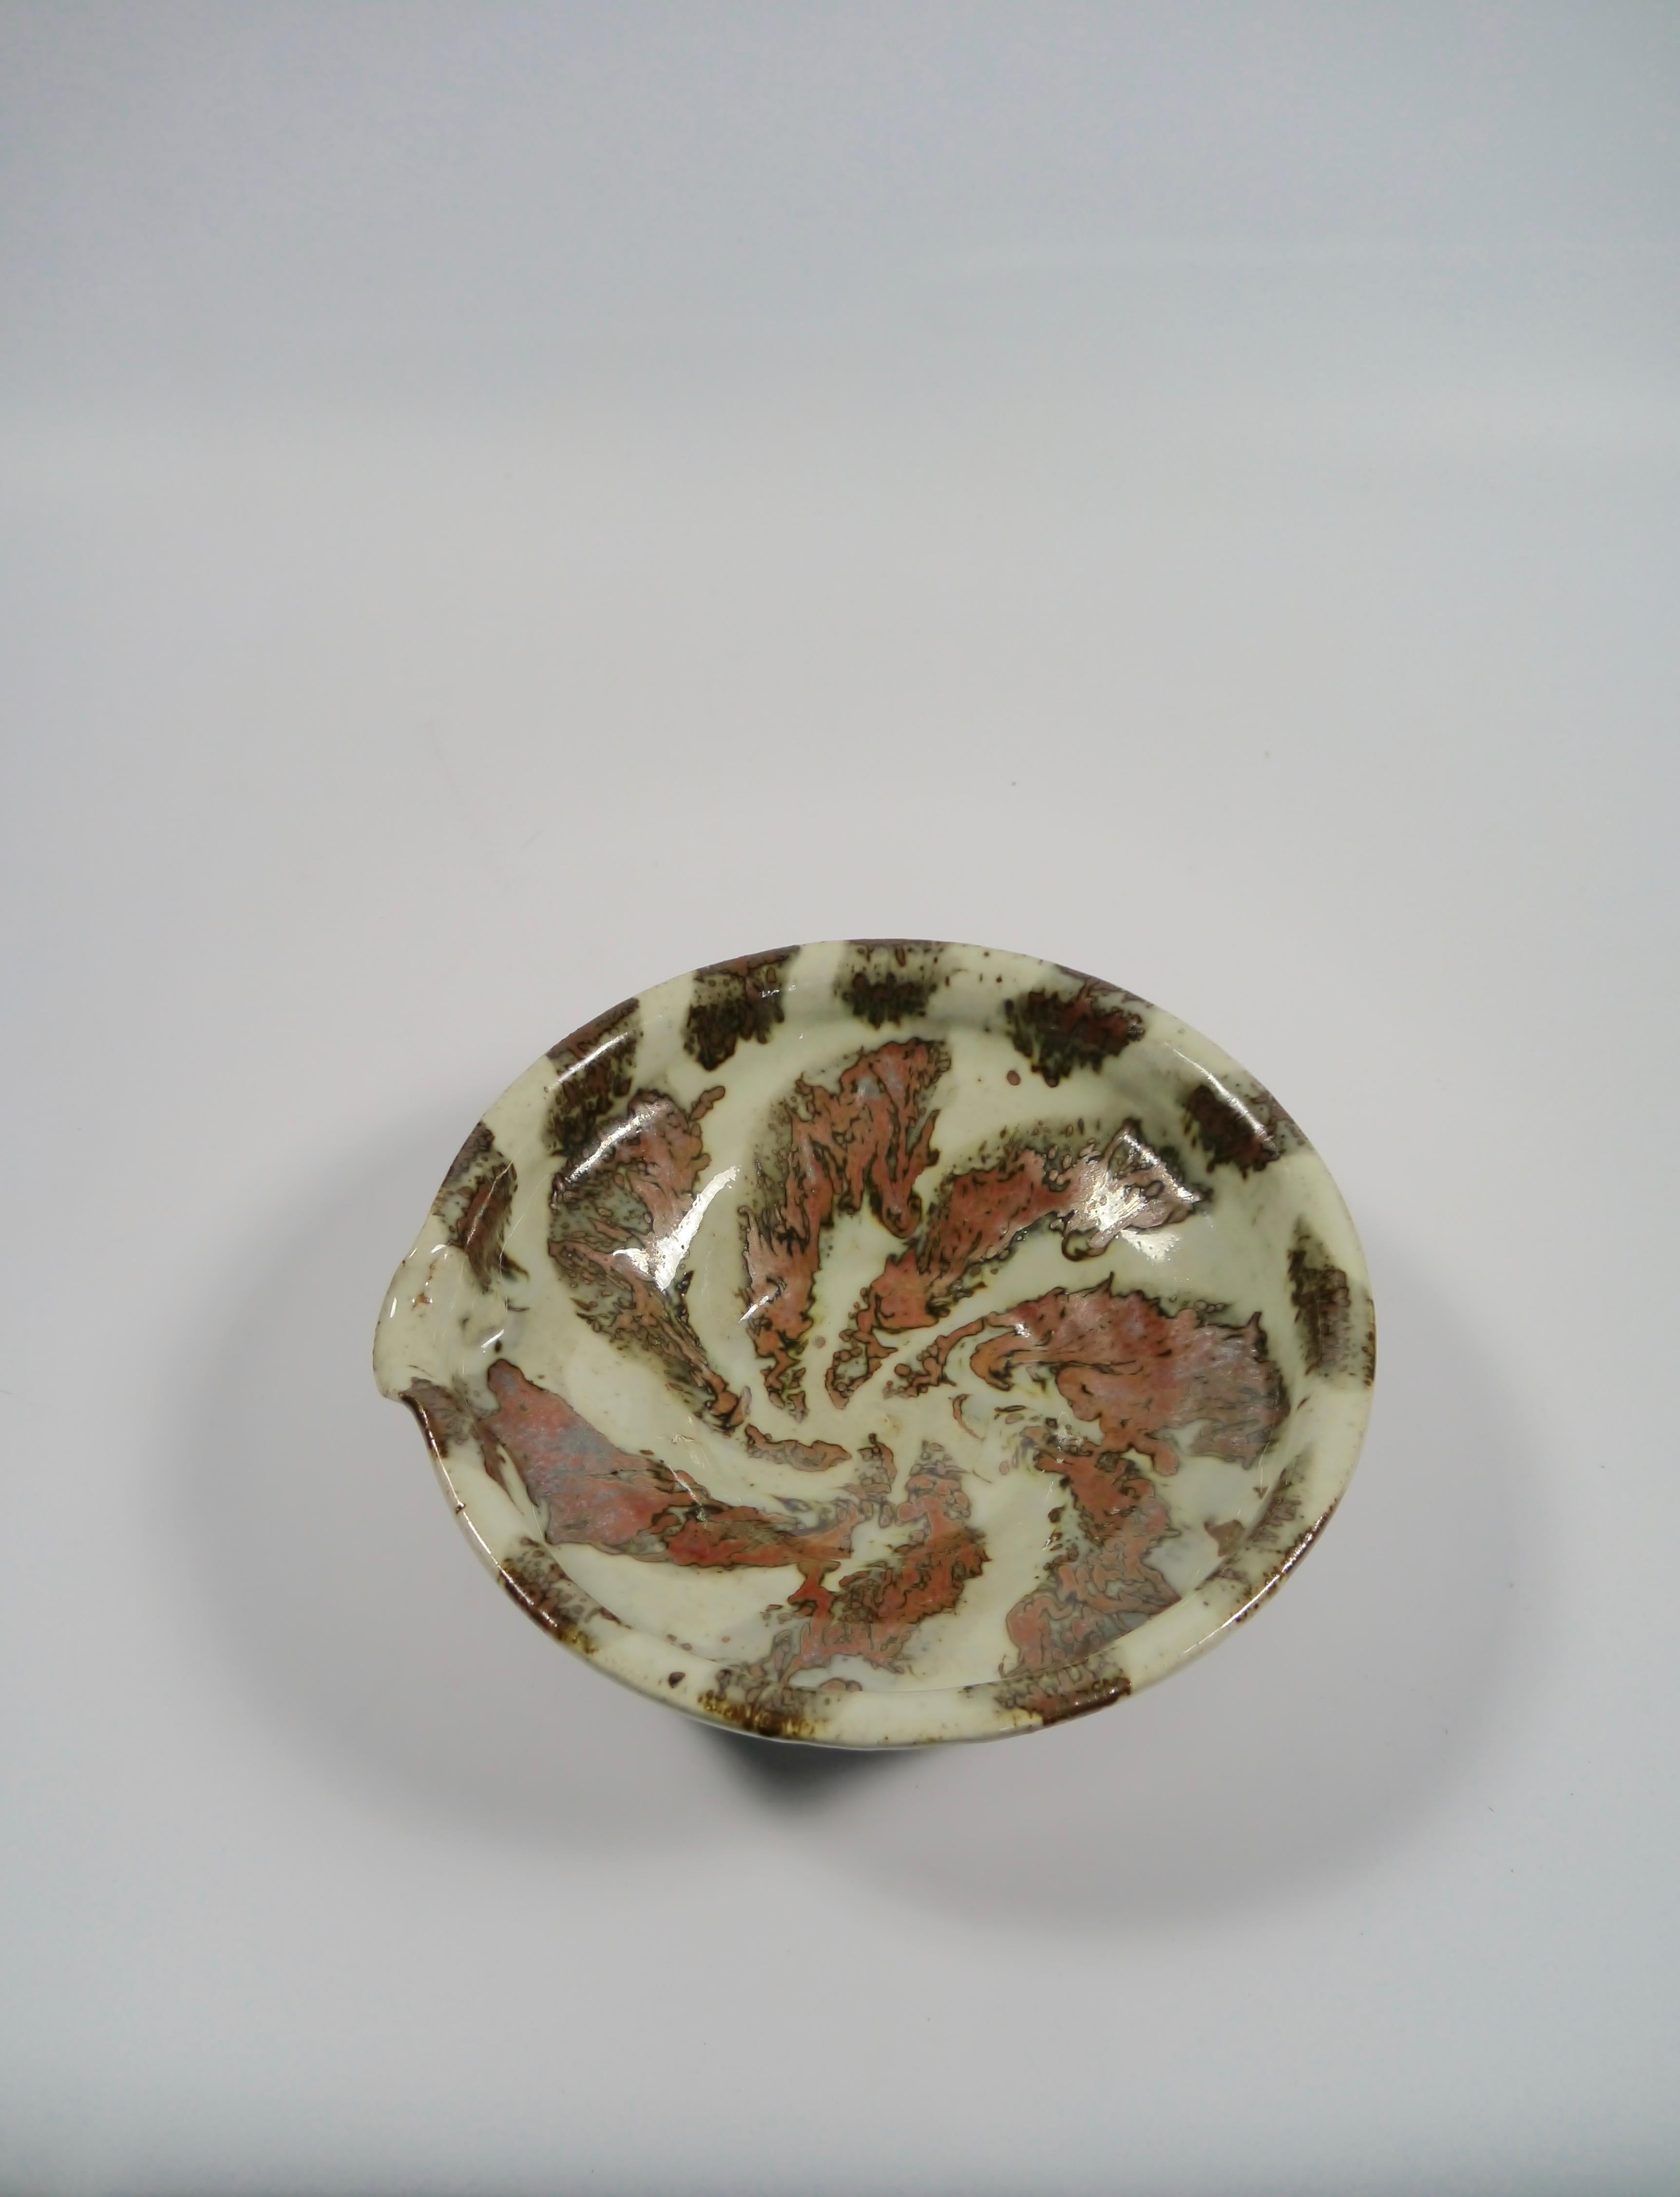 Norwegian Earth Colored Stoneware Dish / Plate by Jens von der Lippe, Norway, 1970s For Sale